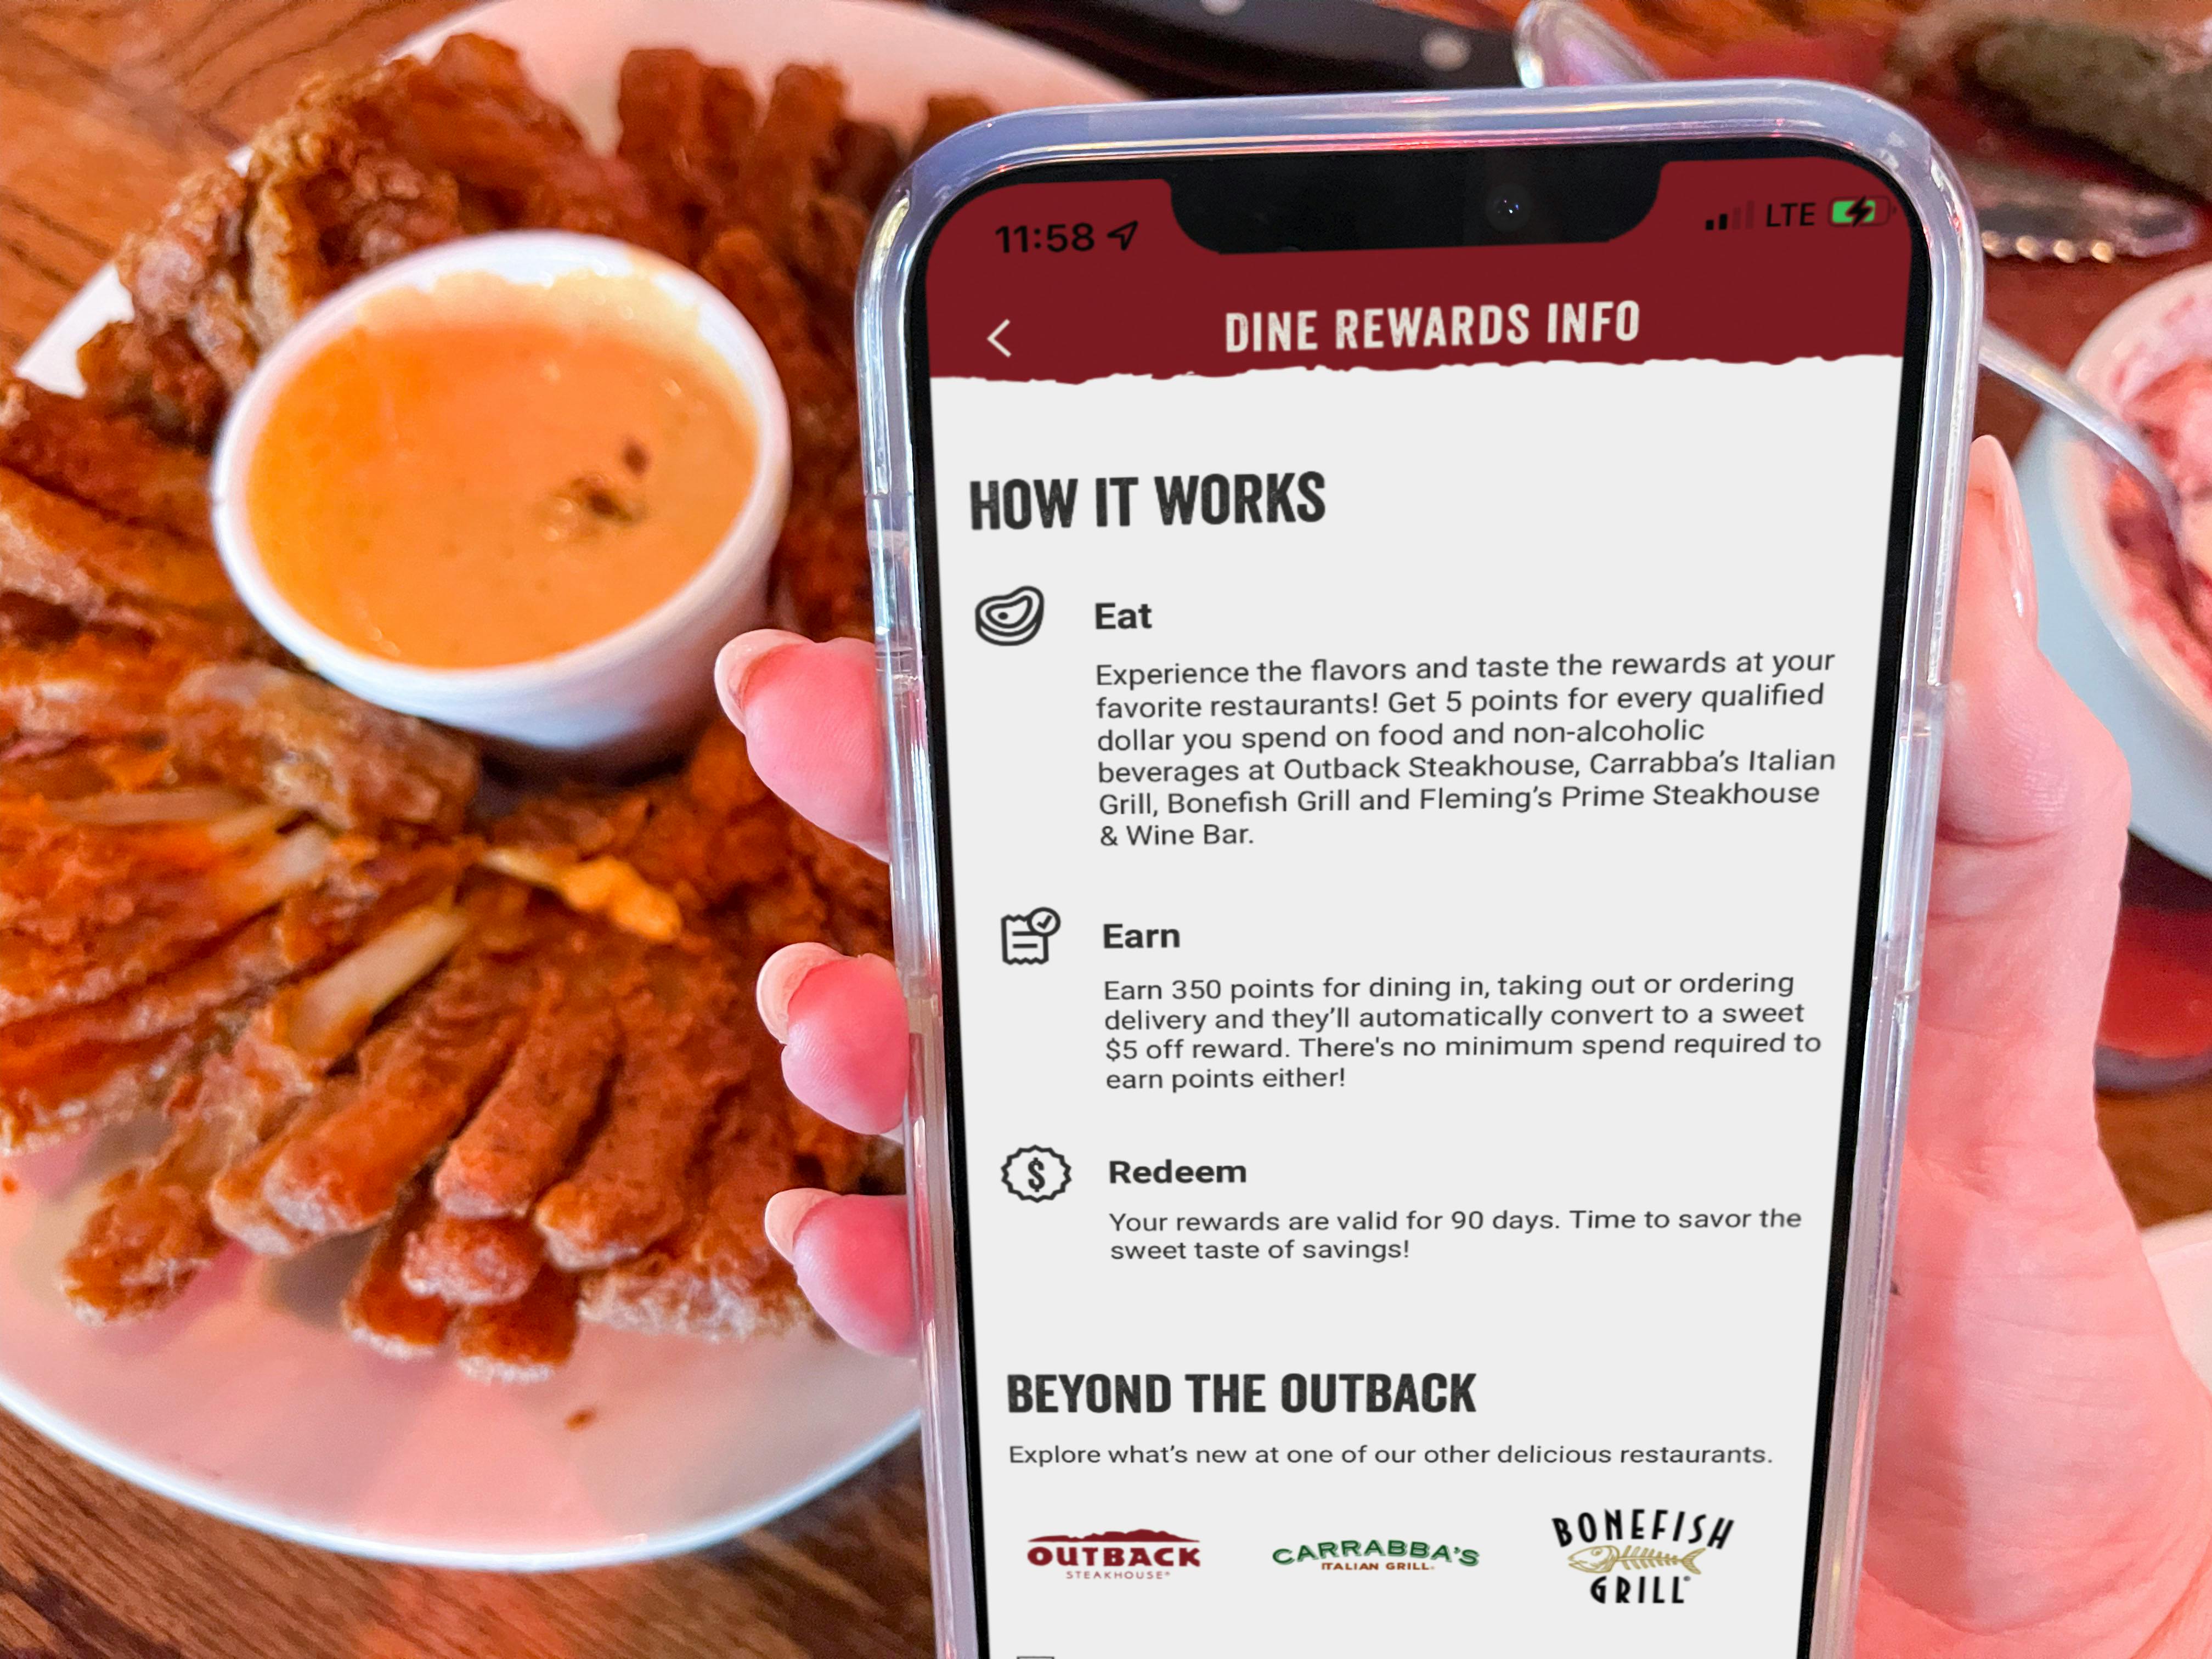 A person's hand holding their phone displaying Outback Steakhouse's Dine Rewards Info in front of a plate of a Bloomin' Onion 